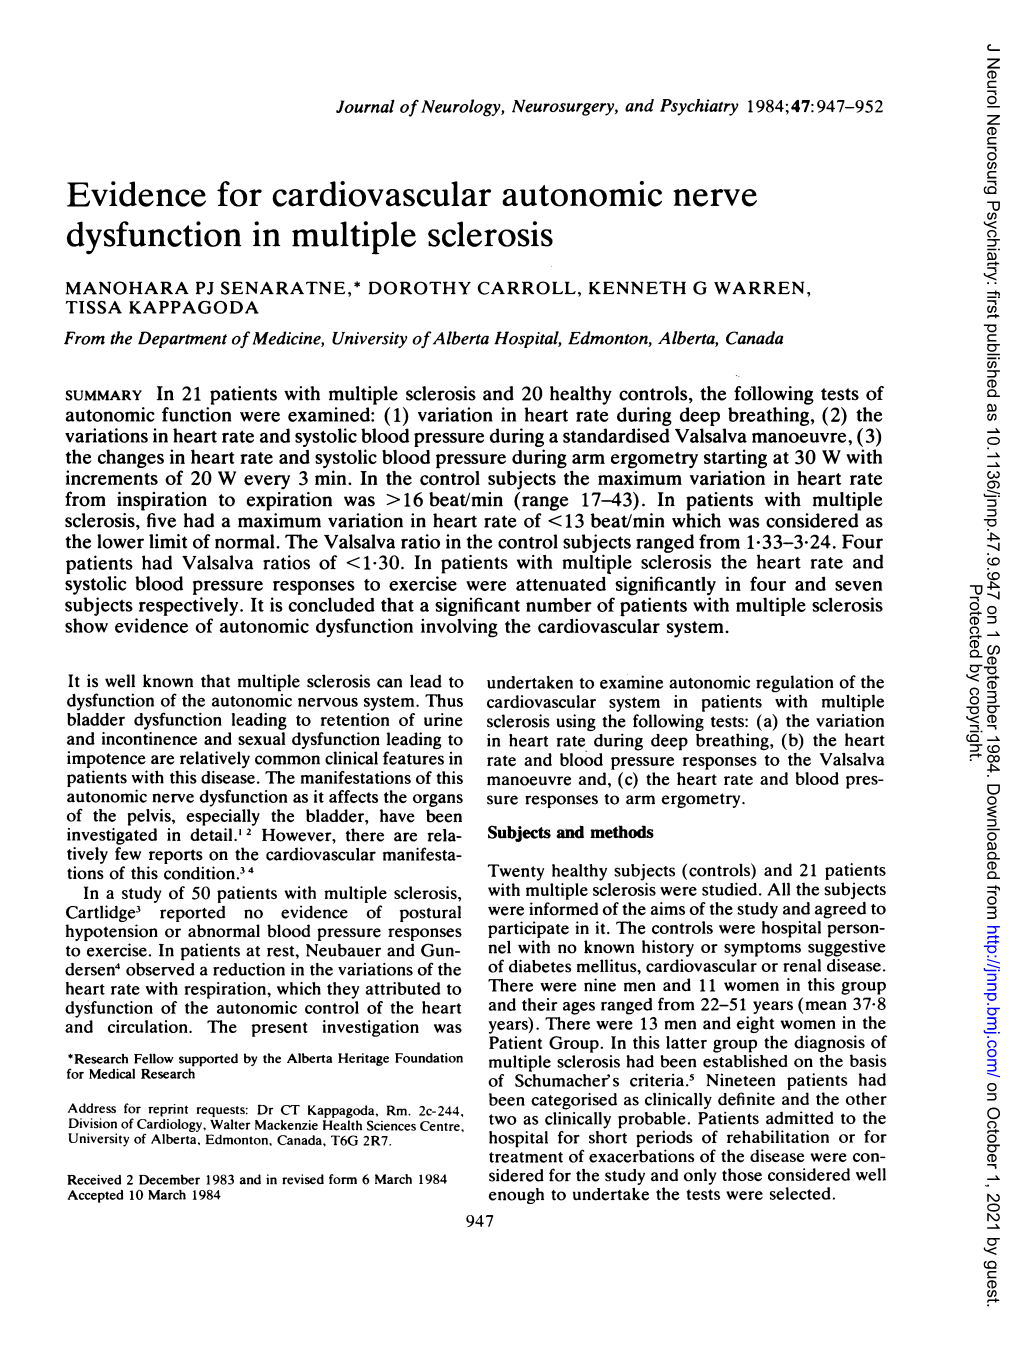 Evidence for Cardiovascular Autonomic Nerve Dysfunction in Multiple Sclerosis